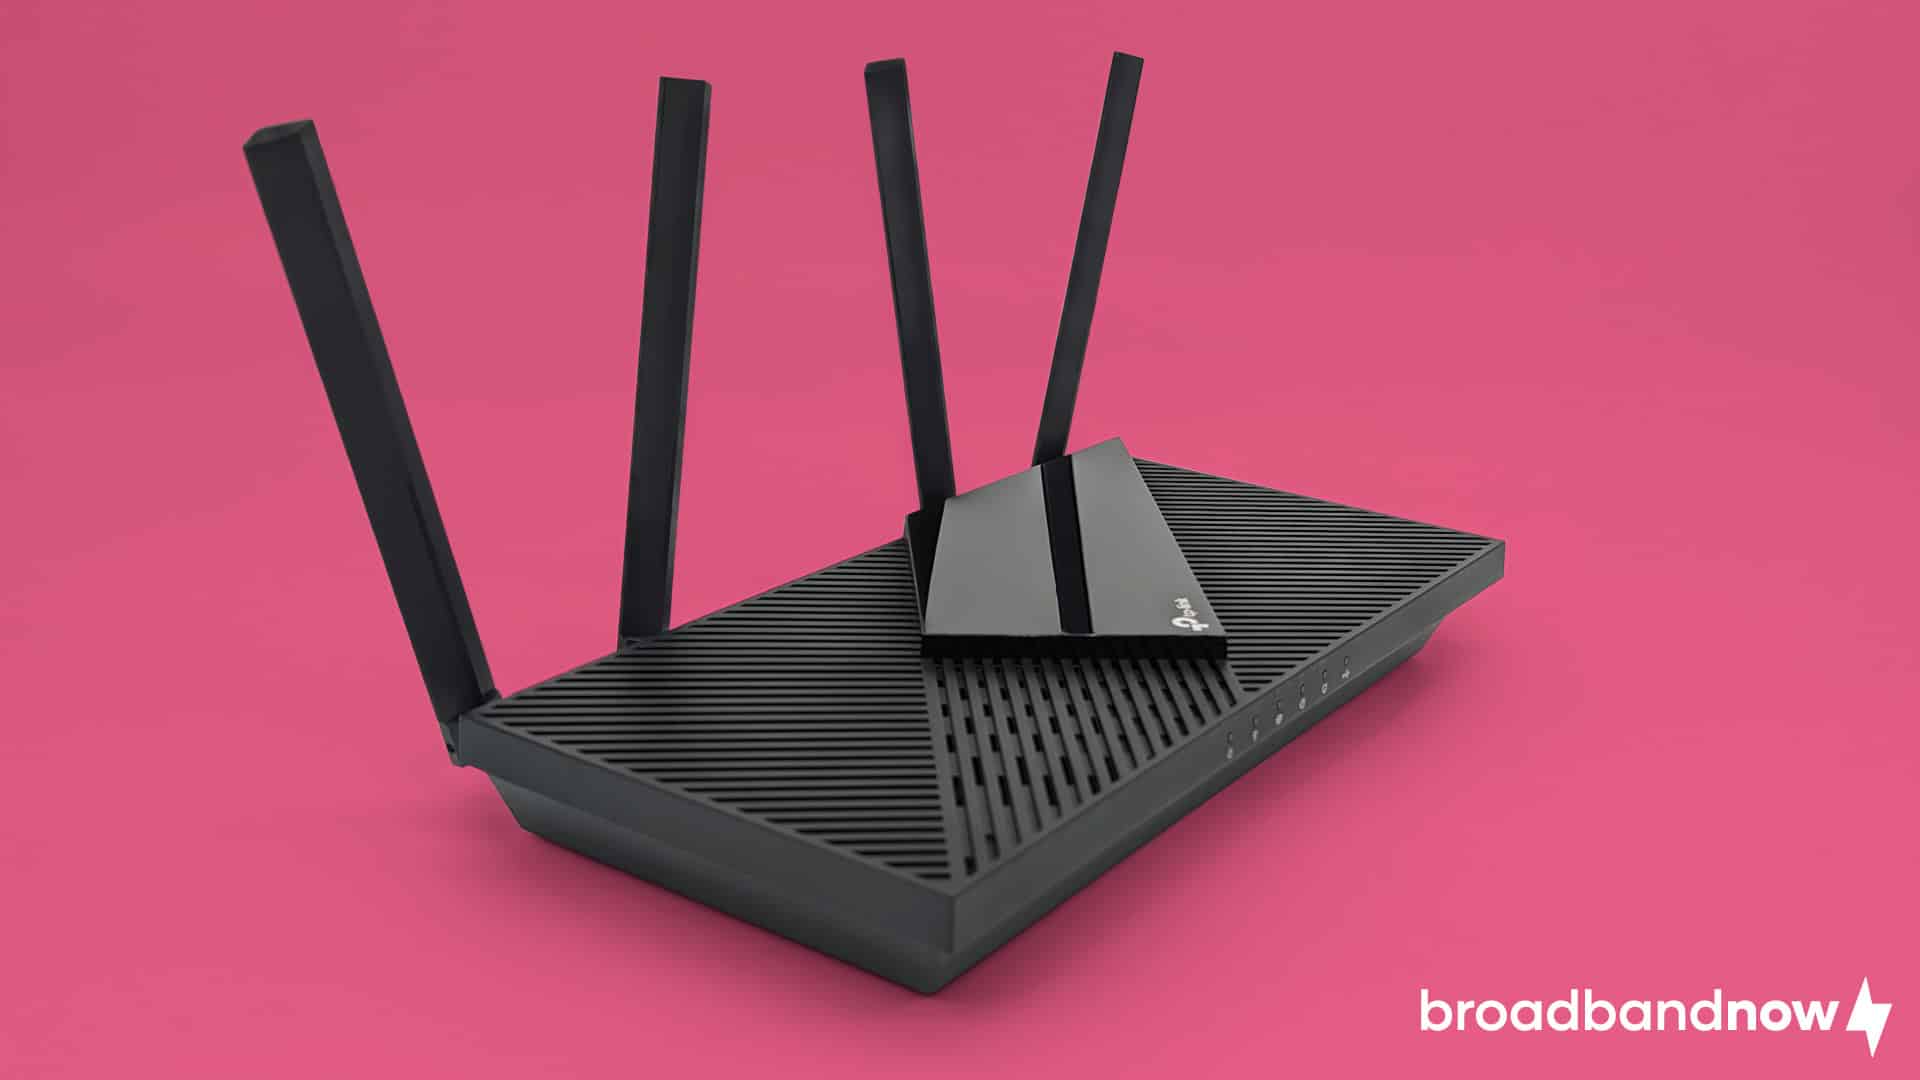 Photo of a TP-Link AX55 Wi-Fi router on a pink background